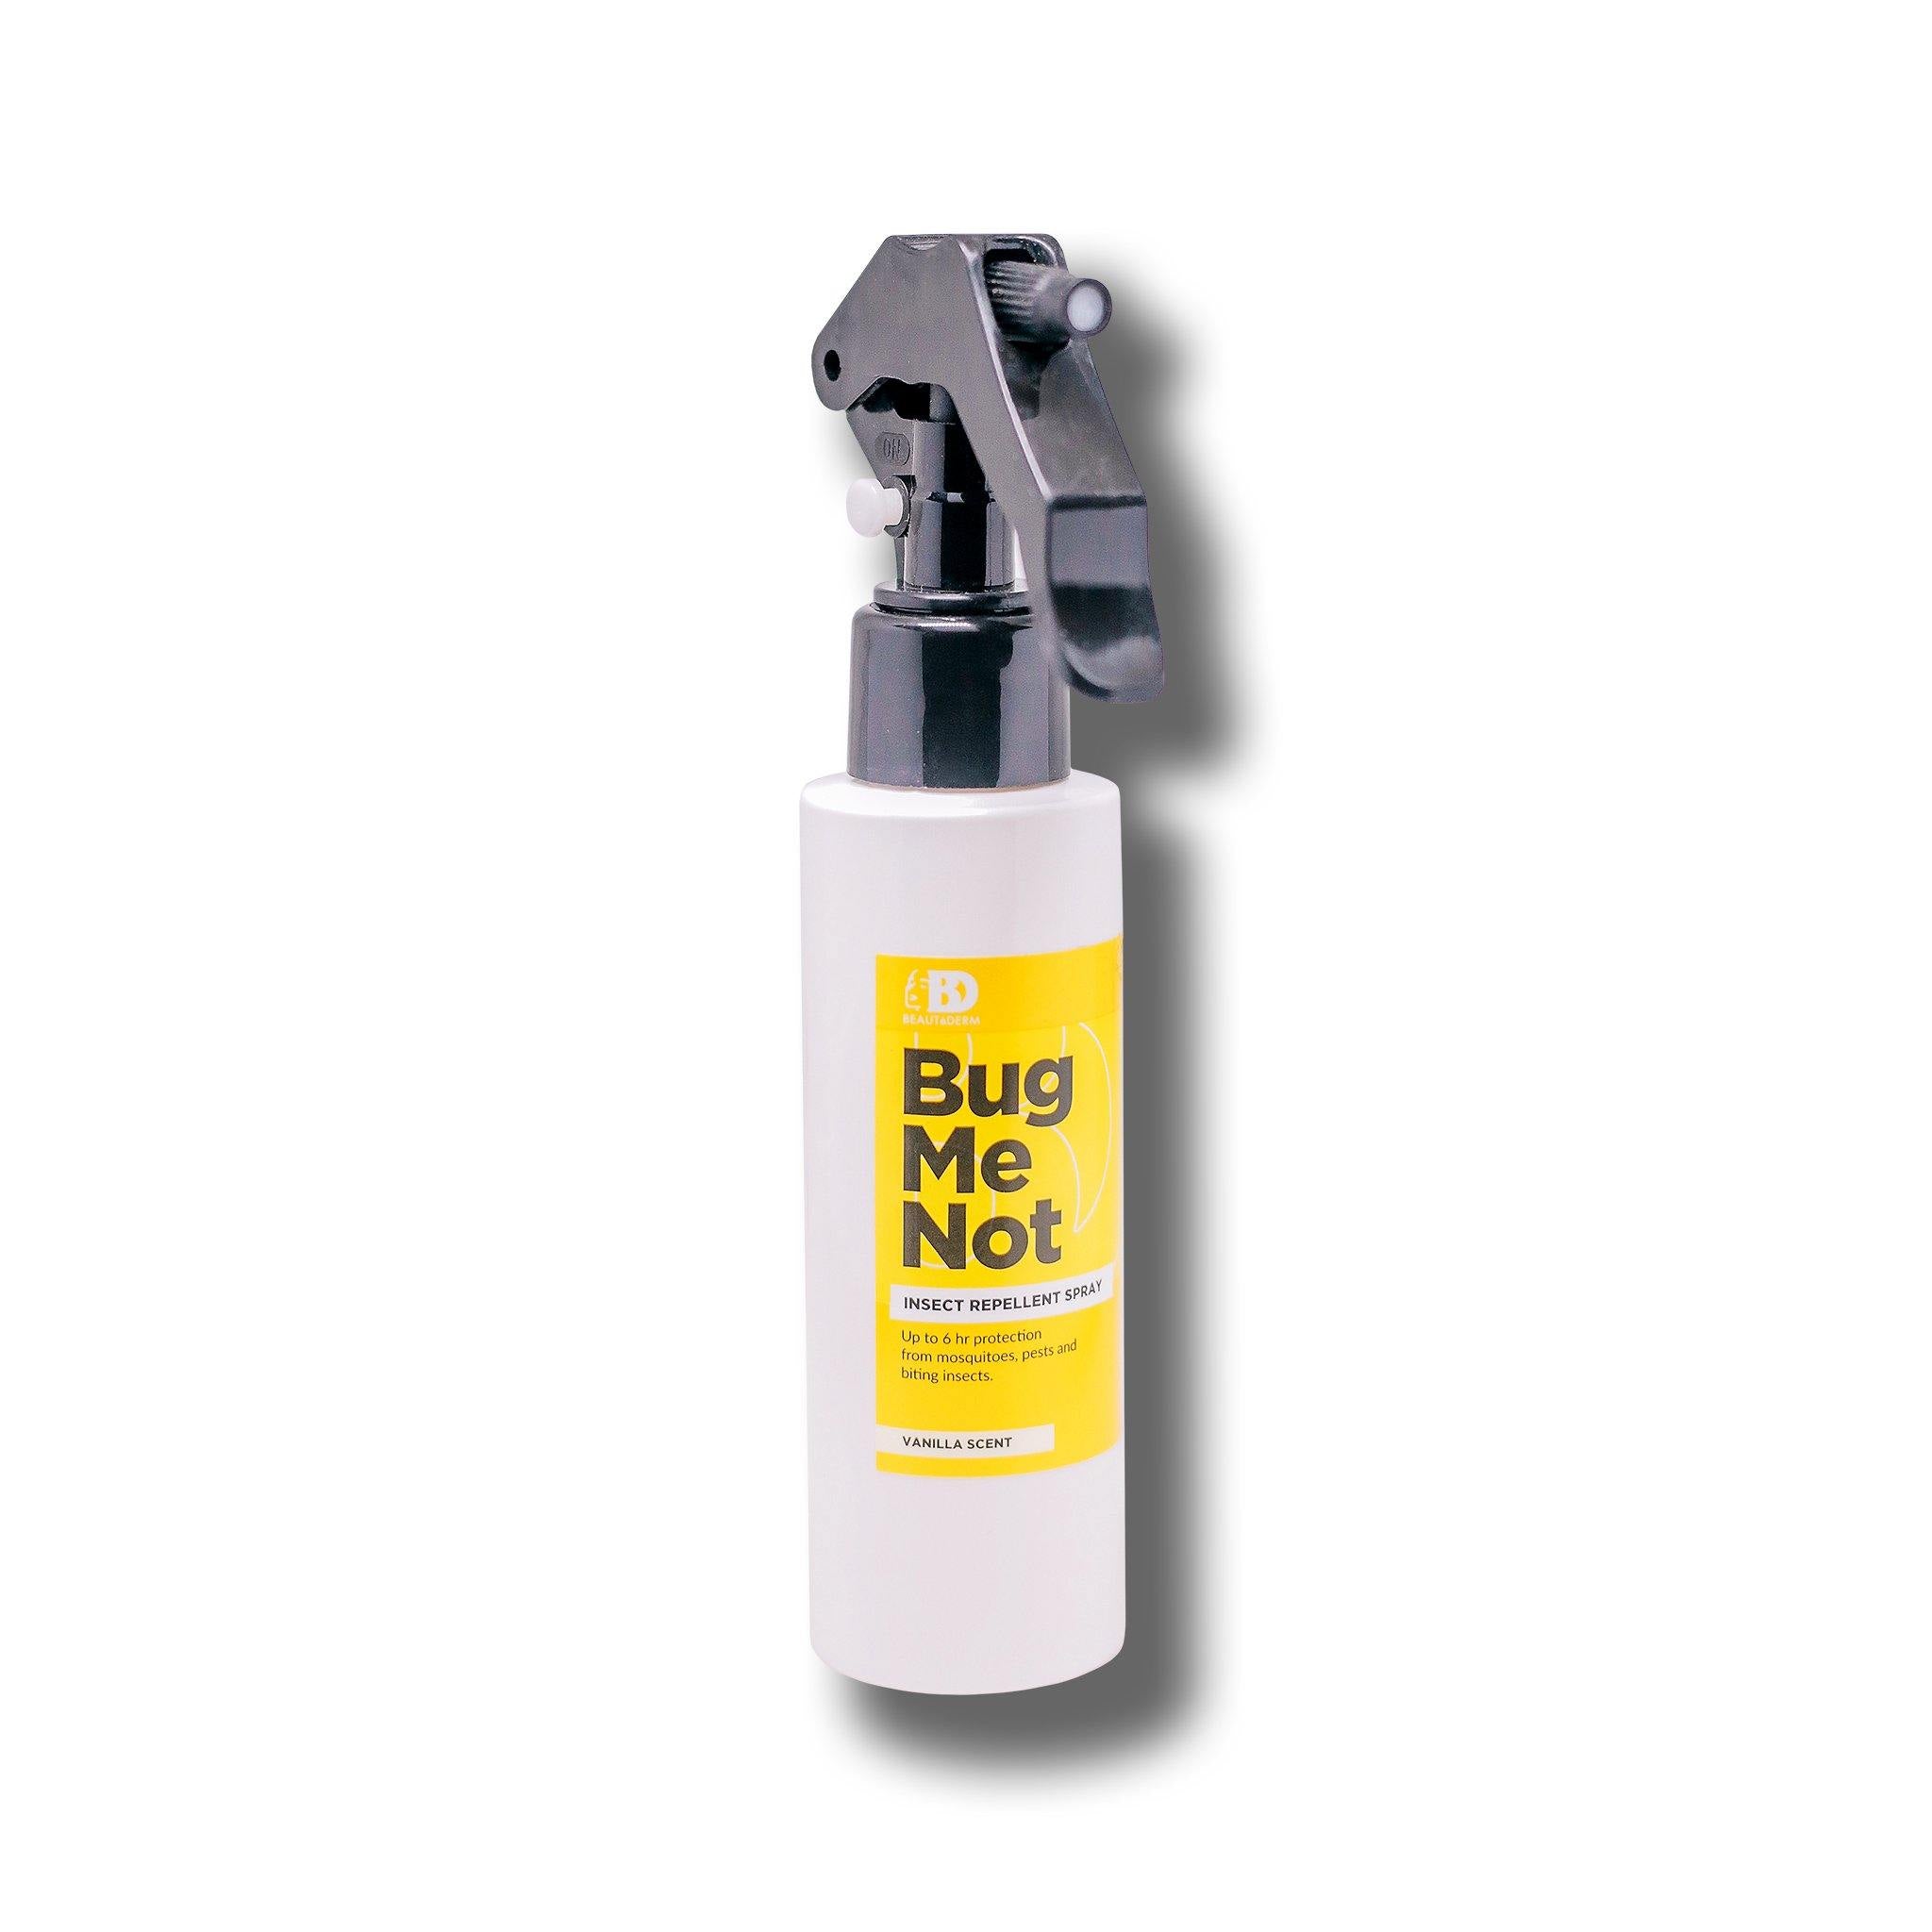 Bug Me Not, Insect Repellent Spray, Vanilla Scent, by Beautederm